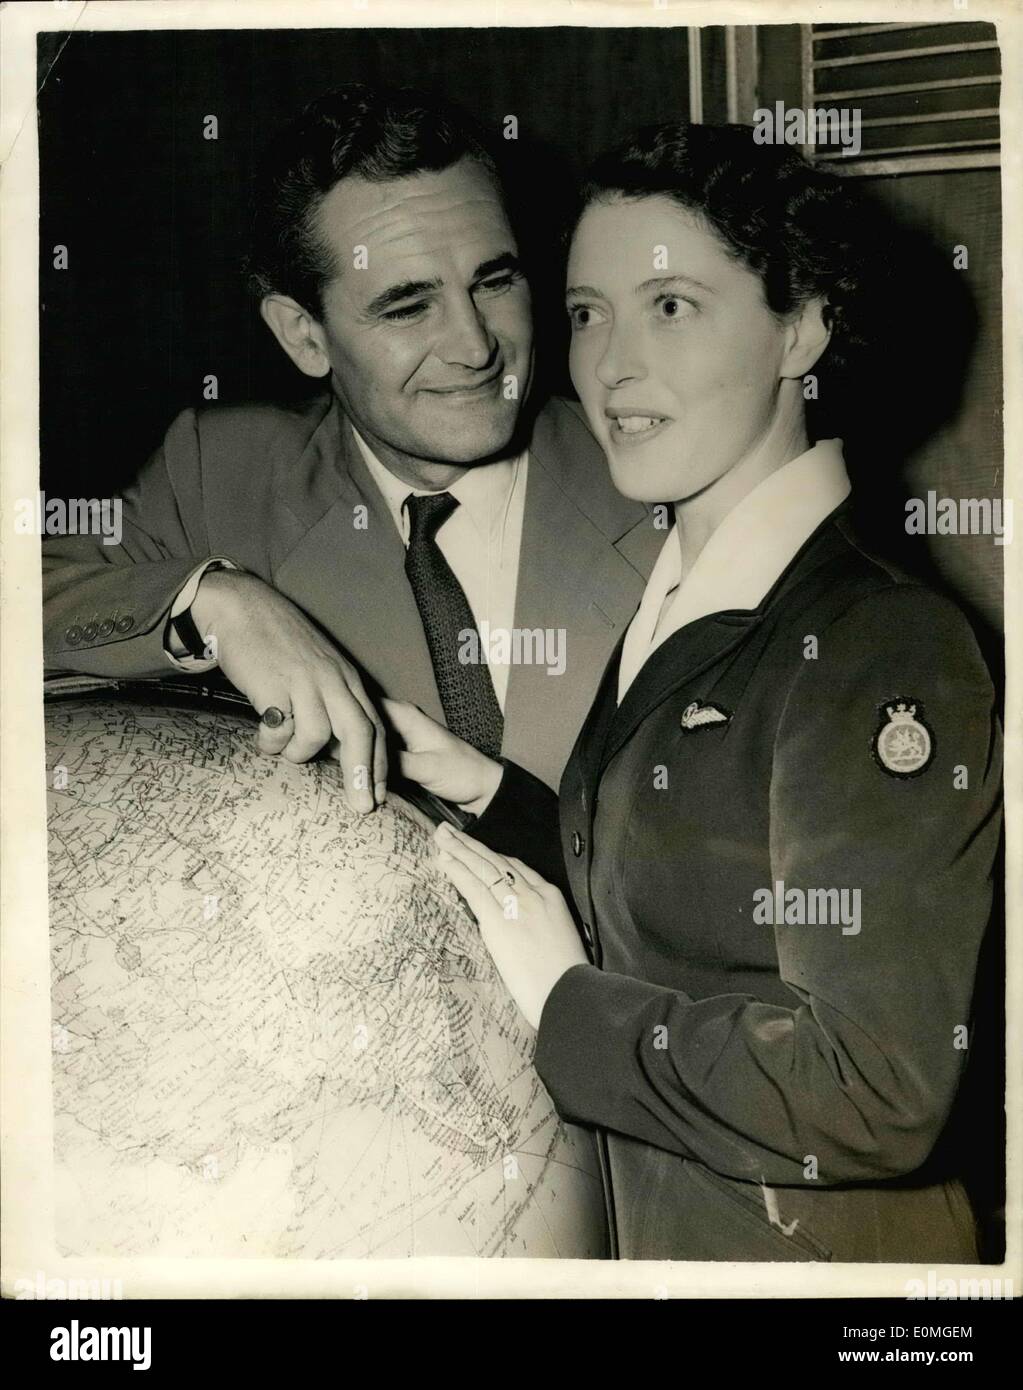 May 04, 1955 - Popular T.V. announcer to wed air hostess. Donald Gray and Sheila Green: The engagement has been announced between Donald Gray the Popular Television on announcer and 26 year old air hostess Sheila Green of Willington, Sussex. They are to marry next Wednesday. Photo shows Donald Grey and Sheila Green they are to marry next Wednesday. He is 41. Stock Photo